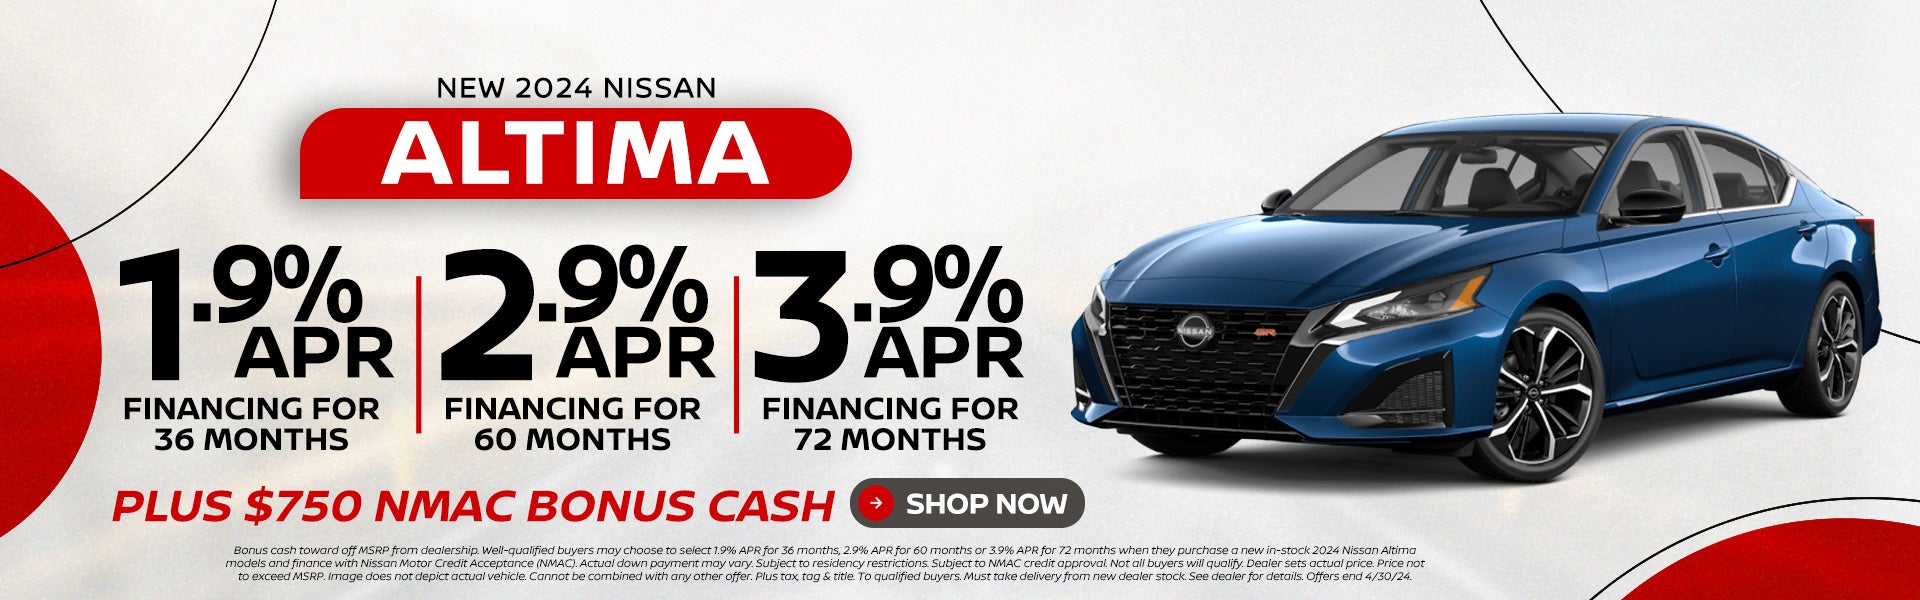 2024 Altima 1.9% APR for 36 months | 2.9%APR for 60 months |